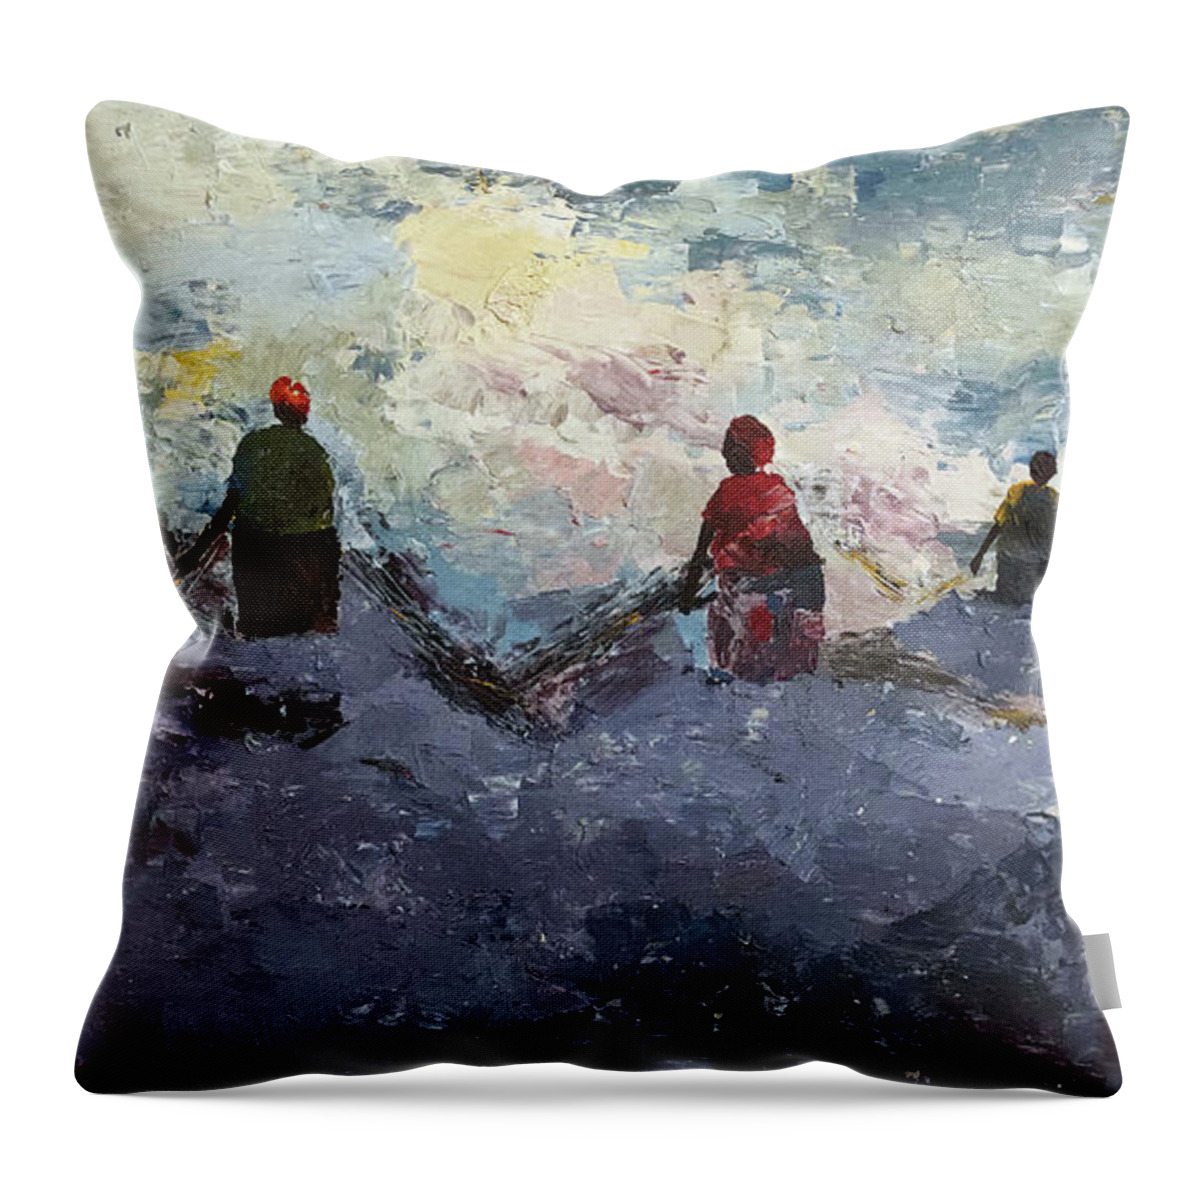 African Art Throw Pillow featuring the painting Morning Tide by Tarizai Munsvhenga